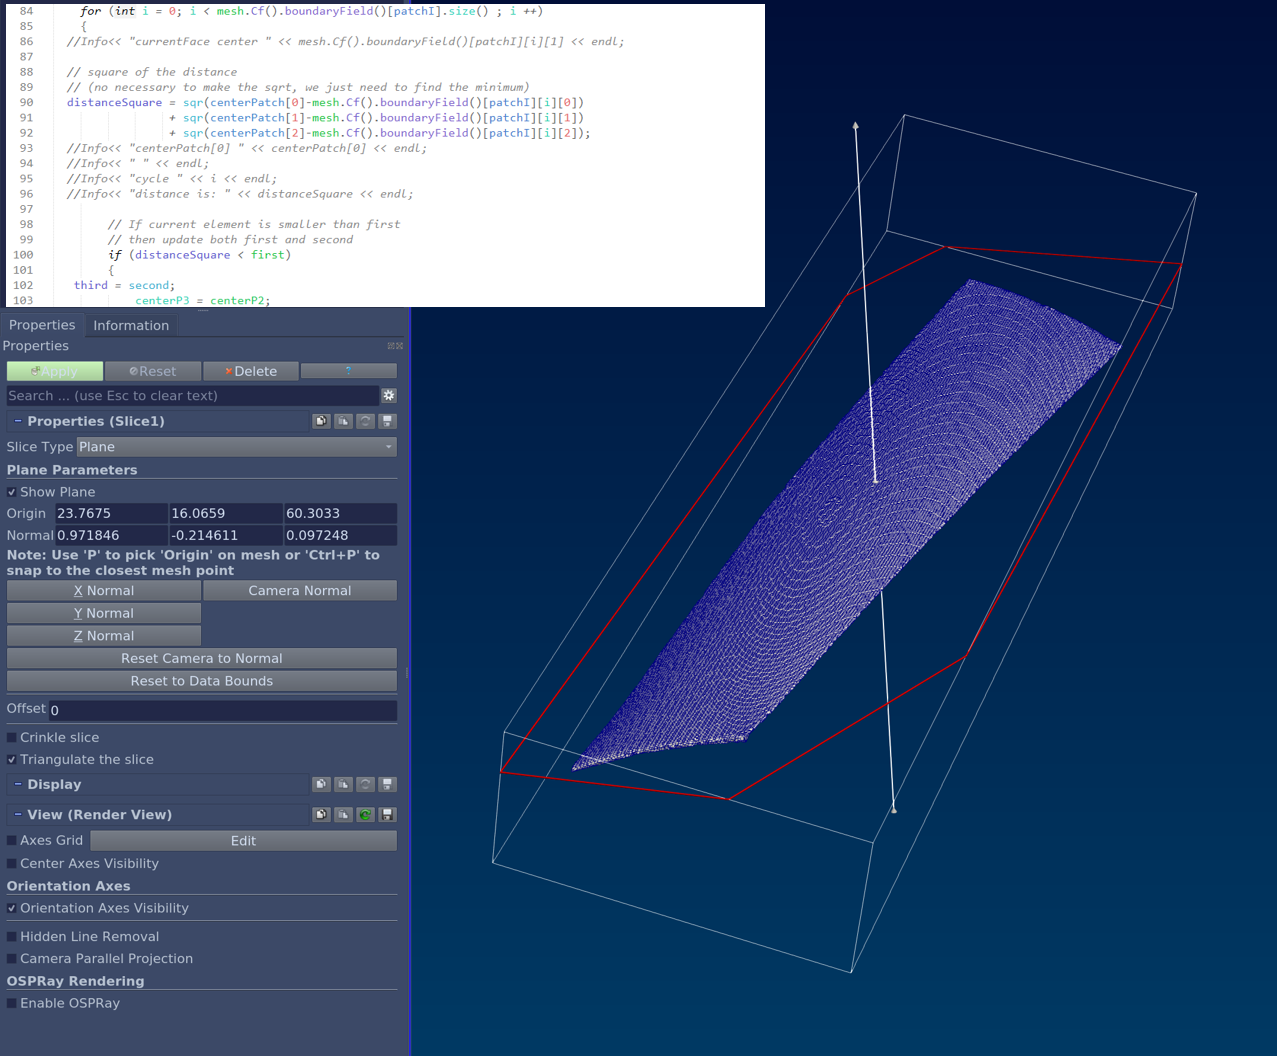 How to create your custom utility in OpenFOAM